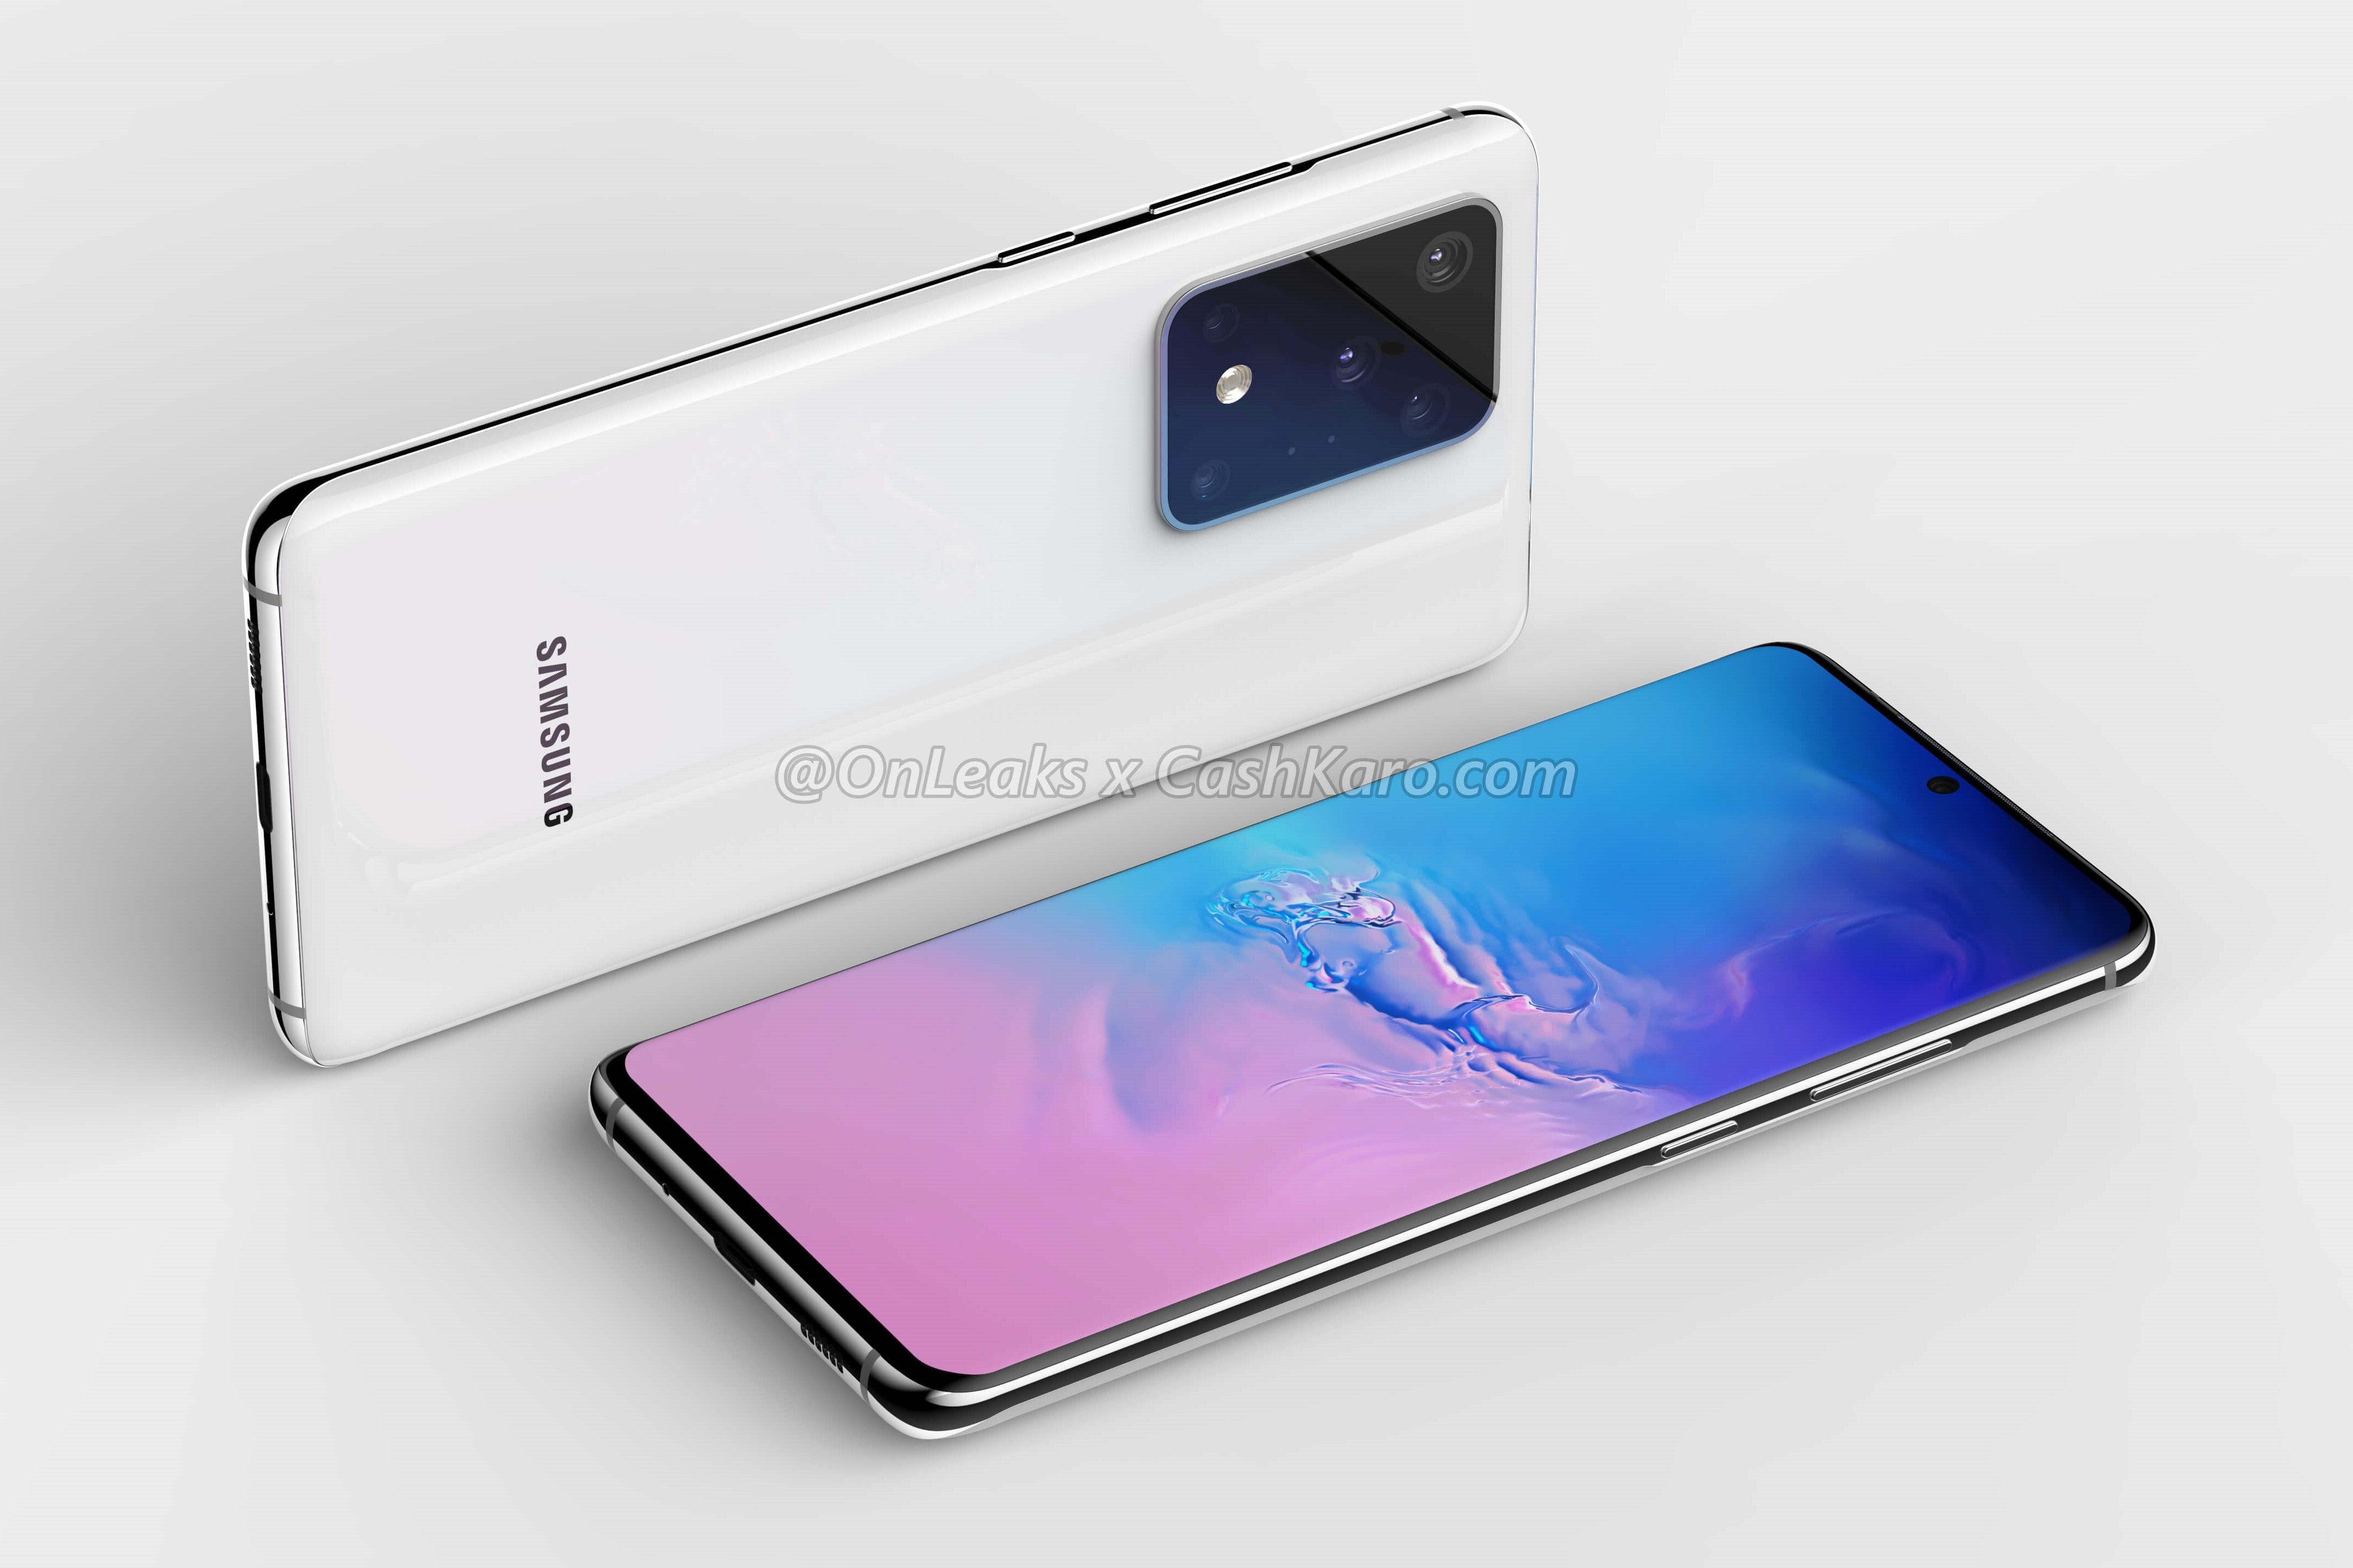 Samsung Galaxy S11+ CAD-based render - The Samsung Galaxy S11+ battery has leaked and it's massive